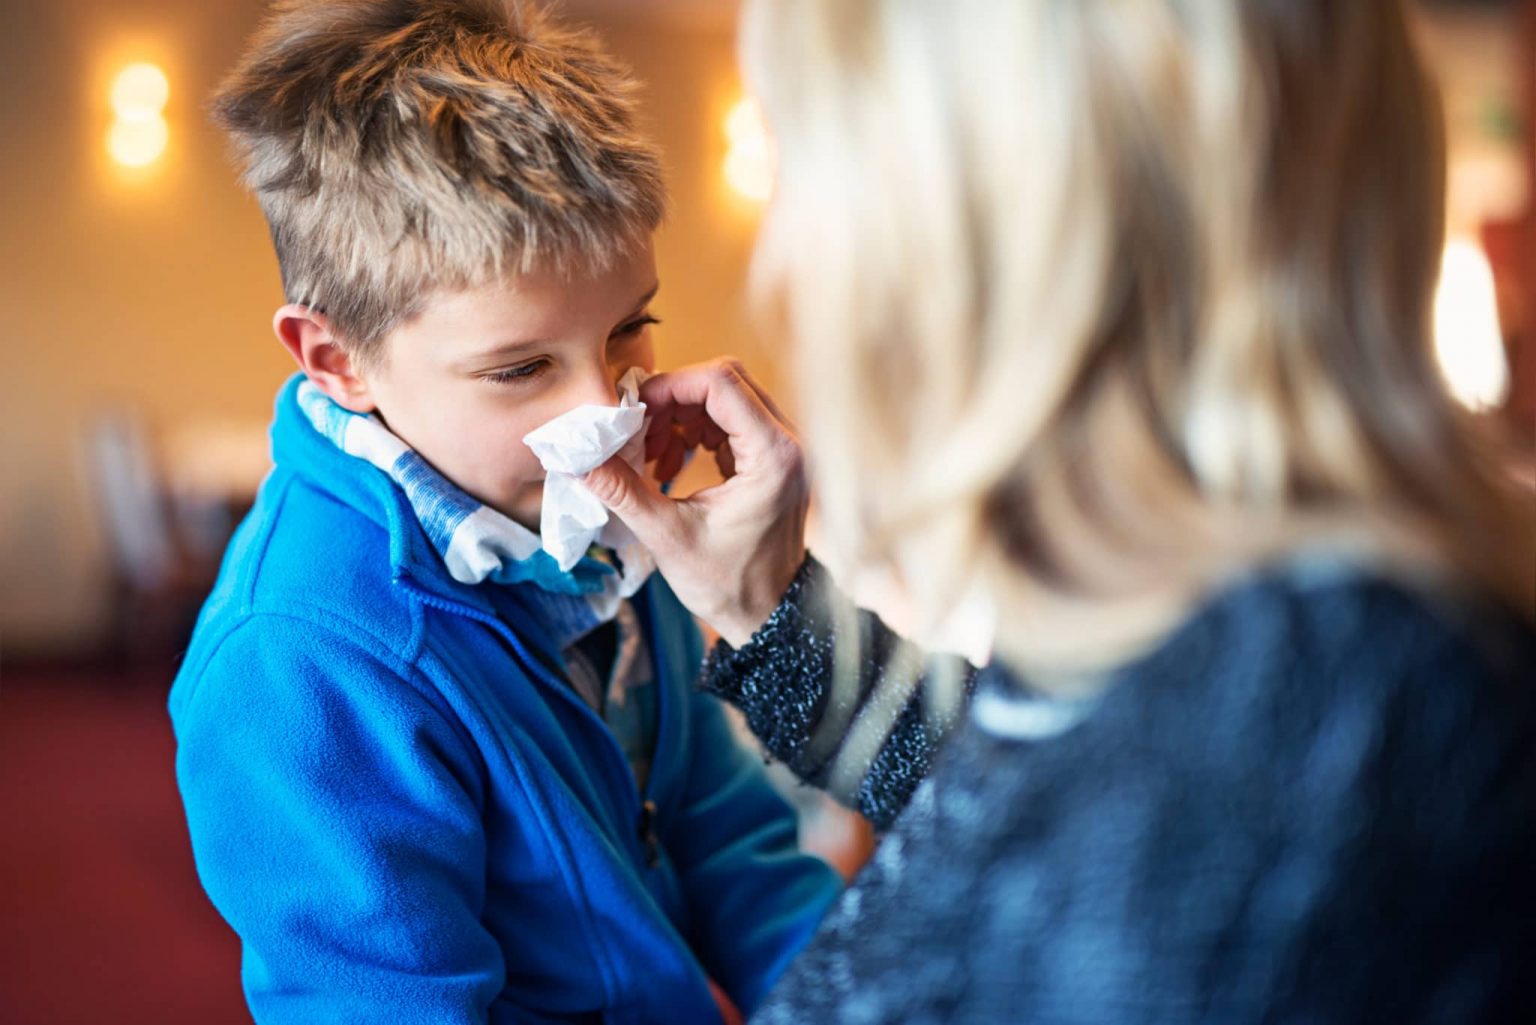 A young boy experiencing allergies blows his nose into a tissue.